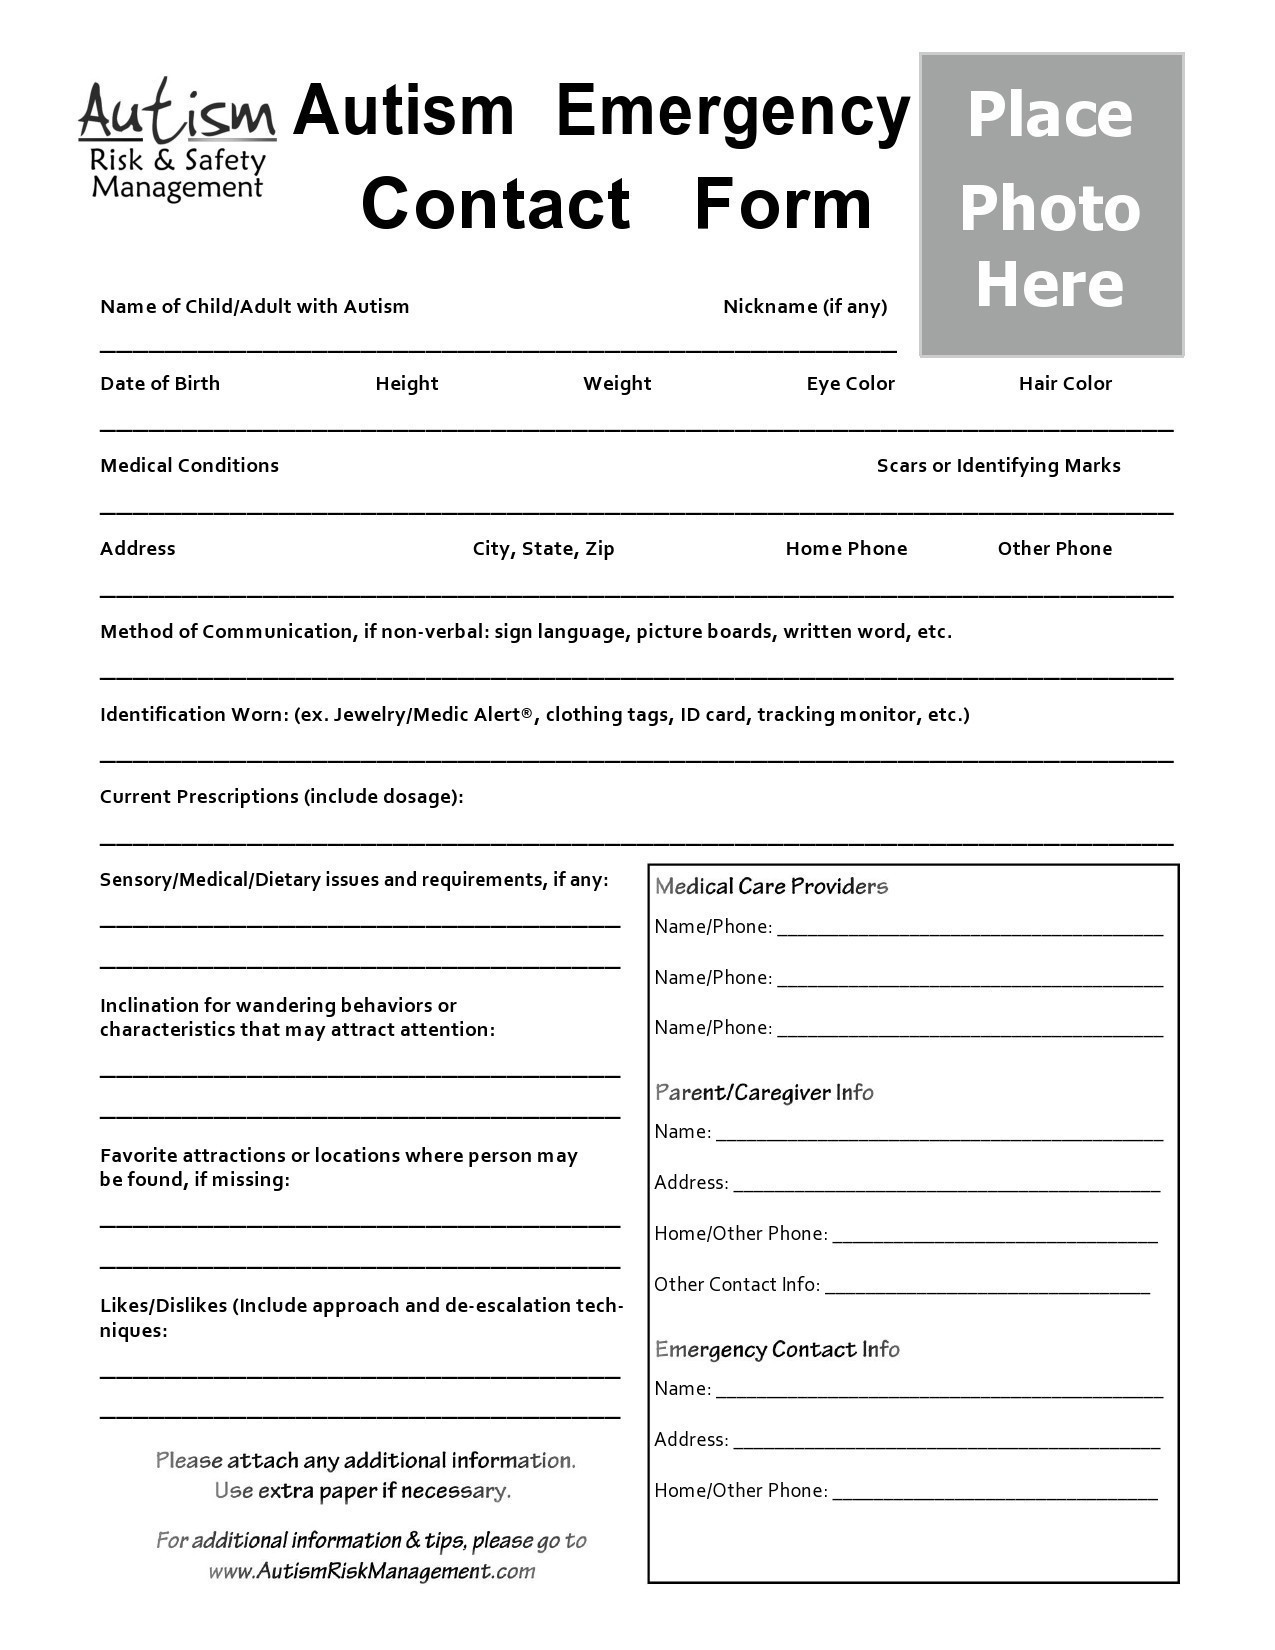 Free emergency contact form 33